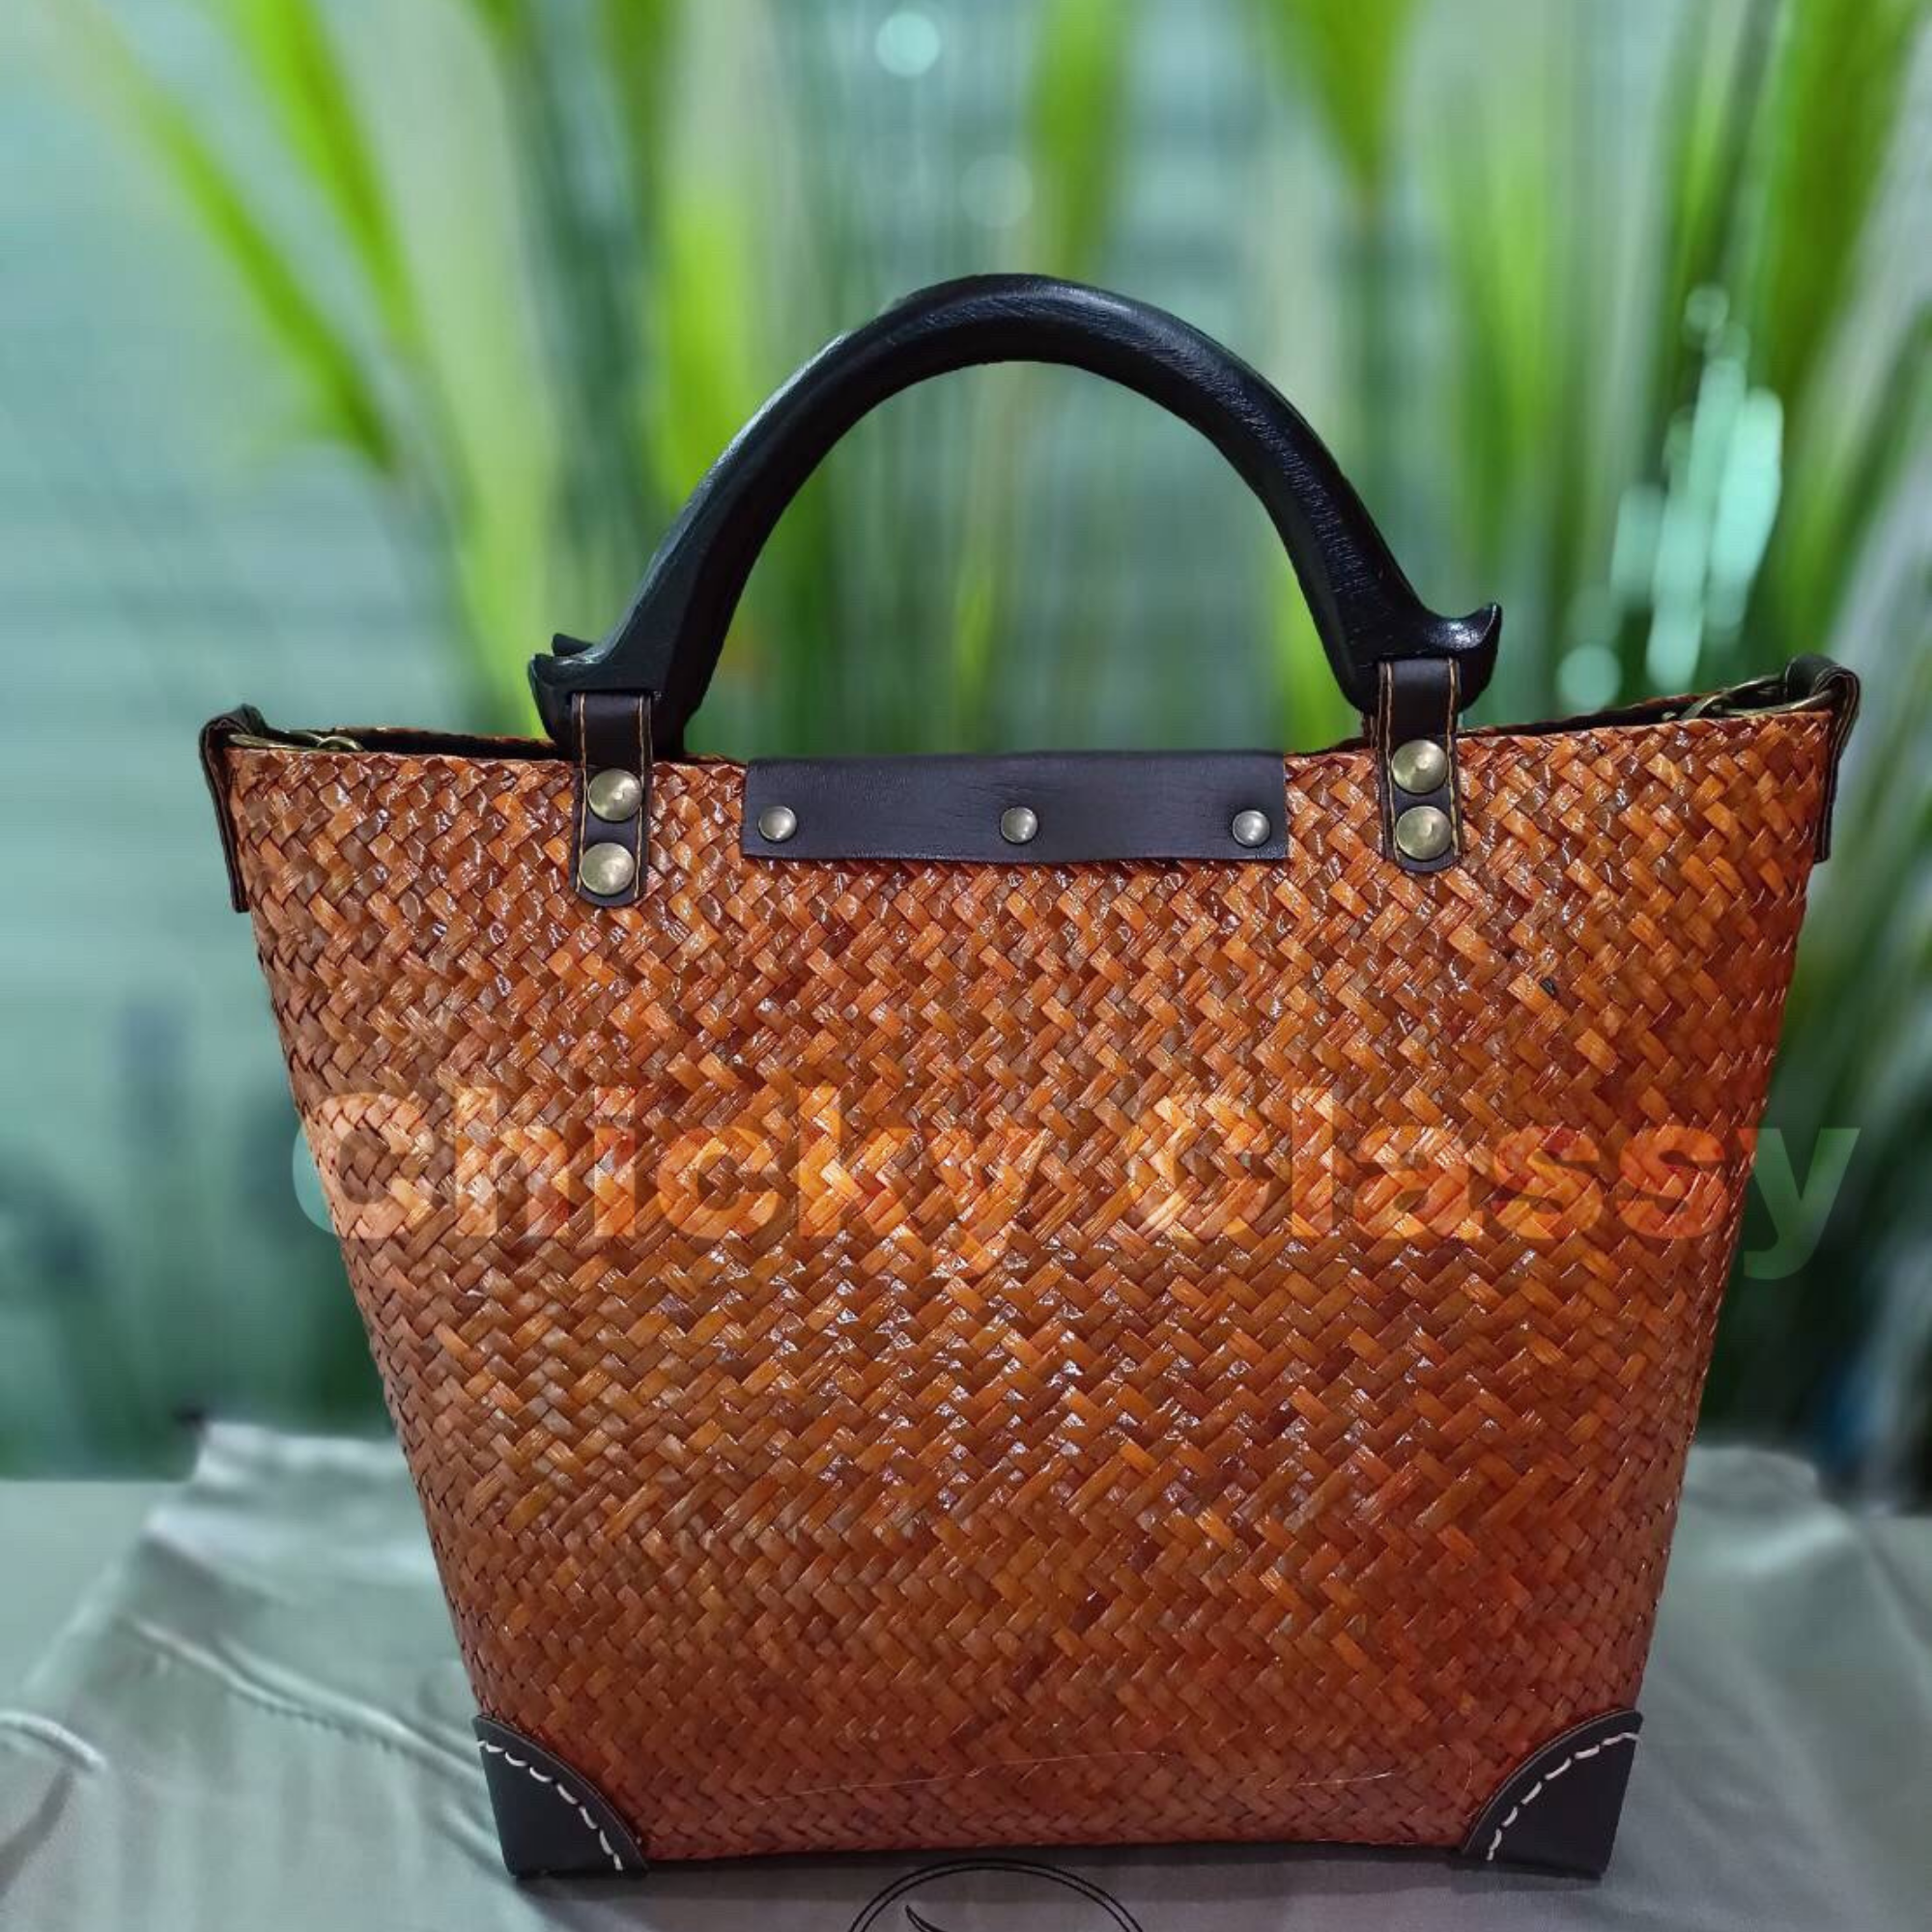 Chicky Classy Home made bag you are the best